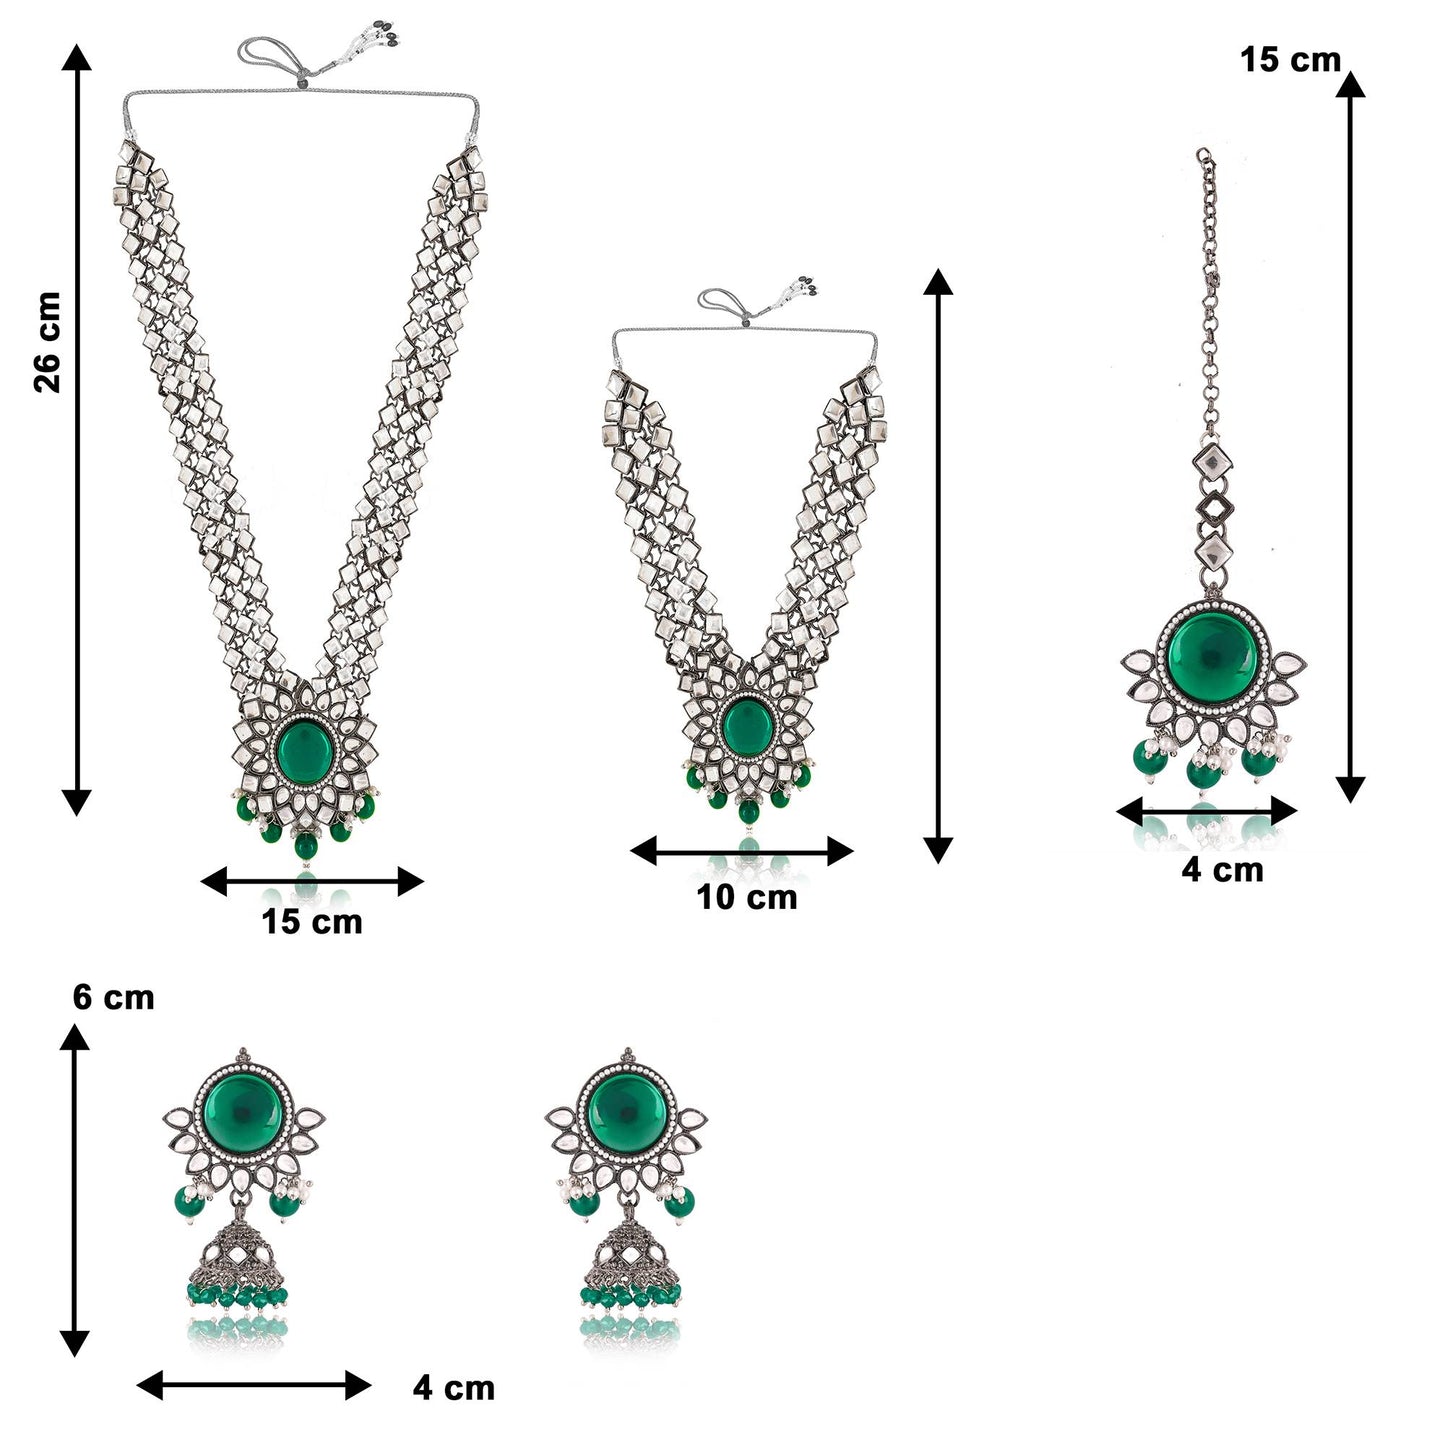 Silver Plated Long and Short Necklace with Green Gem Stones